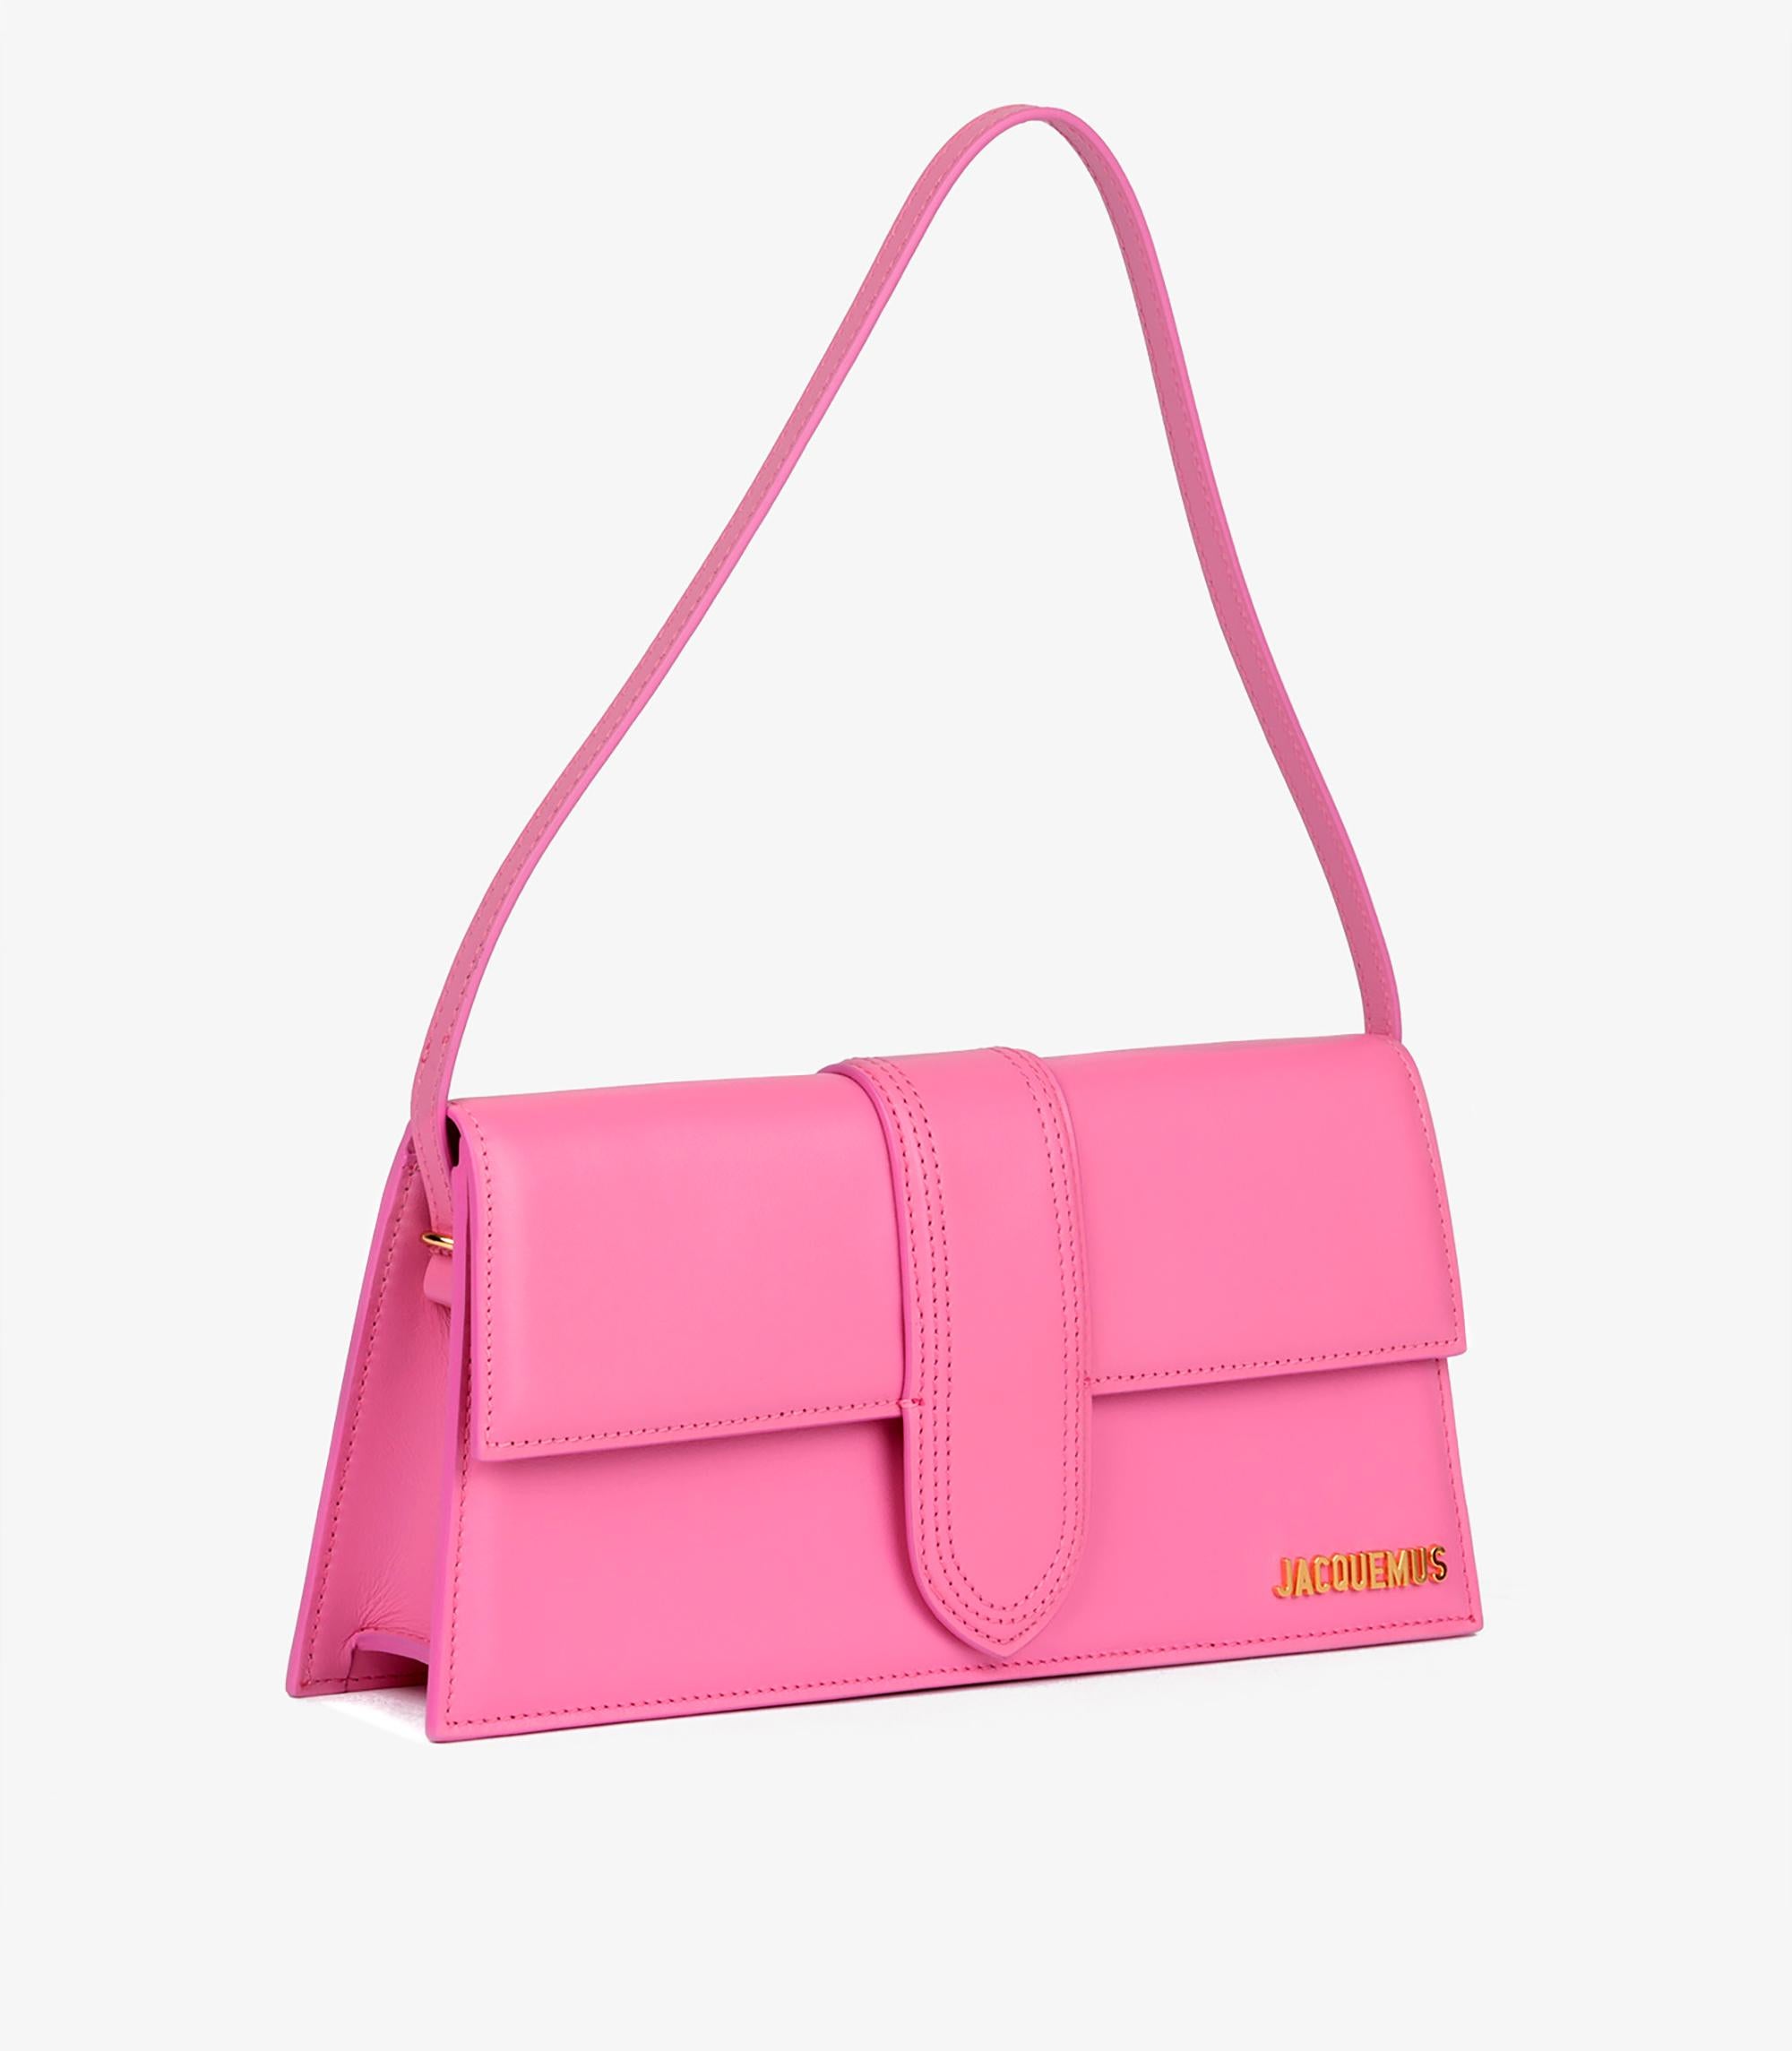 Jacquemus Pink Smooth Calfskin Leather Le Bambino Long In New Condition For Sale In Bishop's Stortford, Hertfordshire